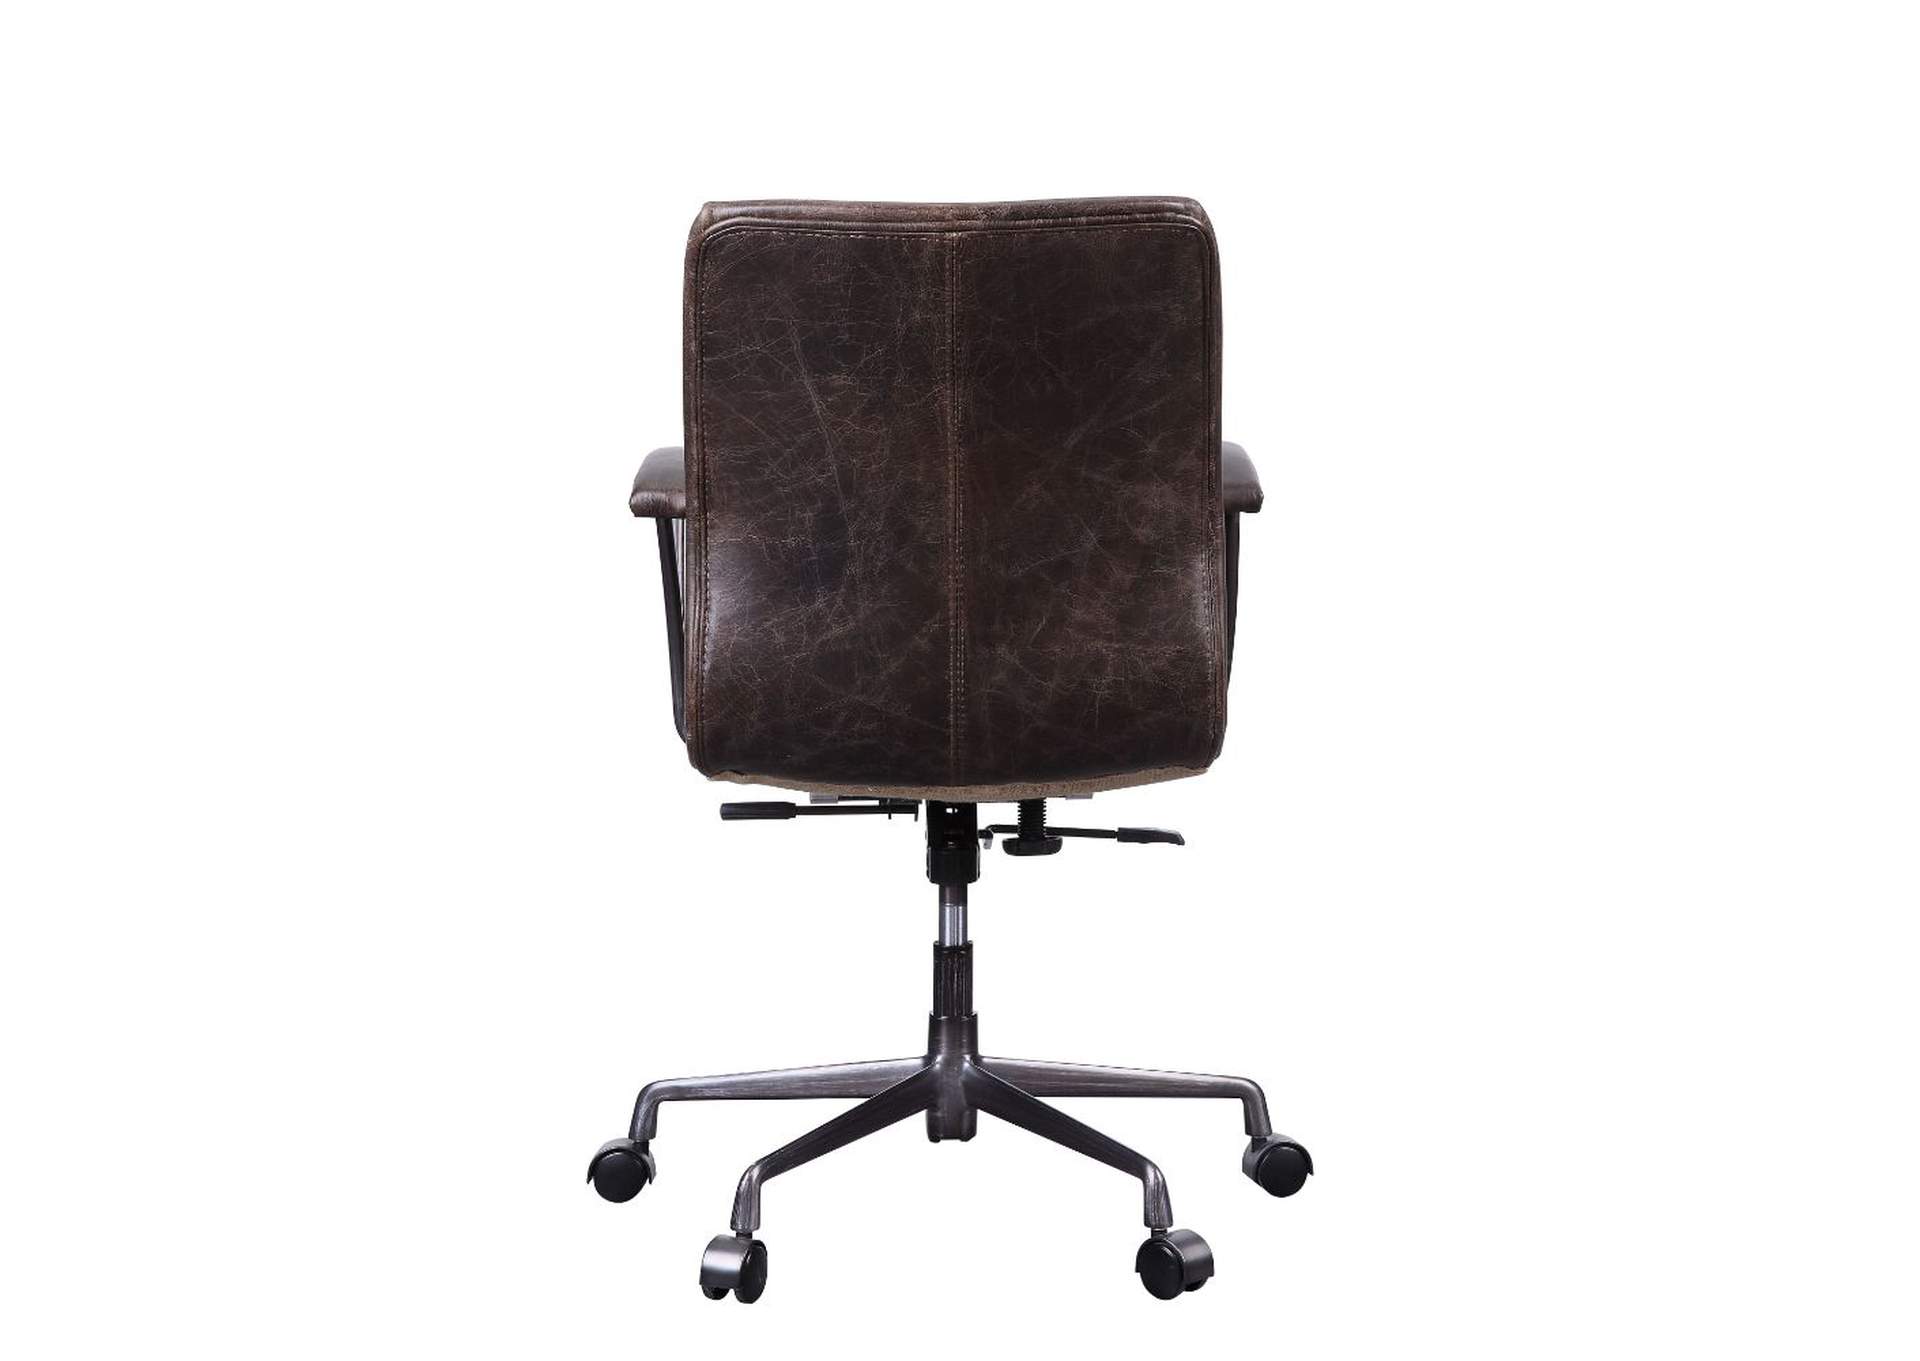 Zooey Executive office chair,Acme